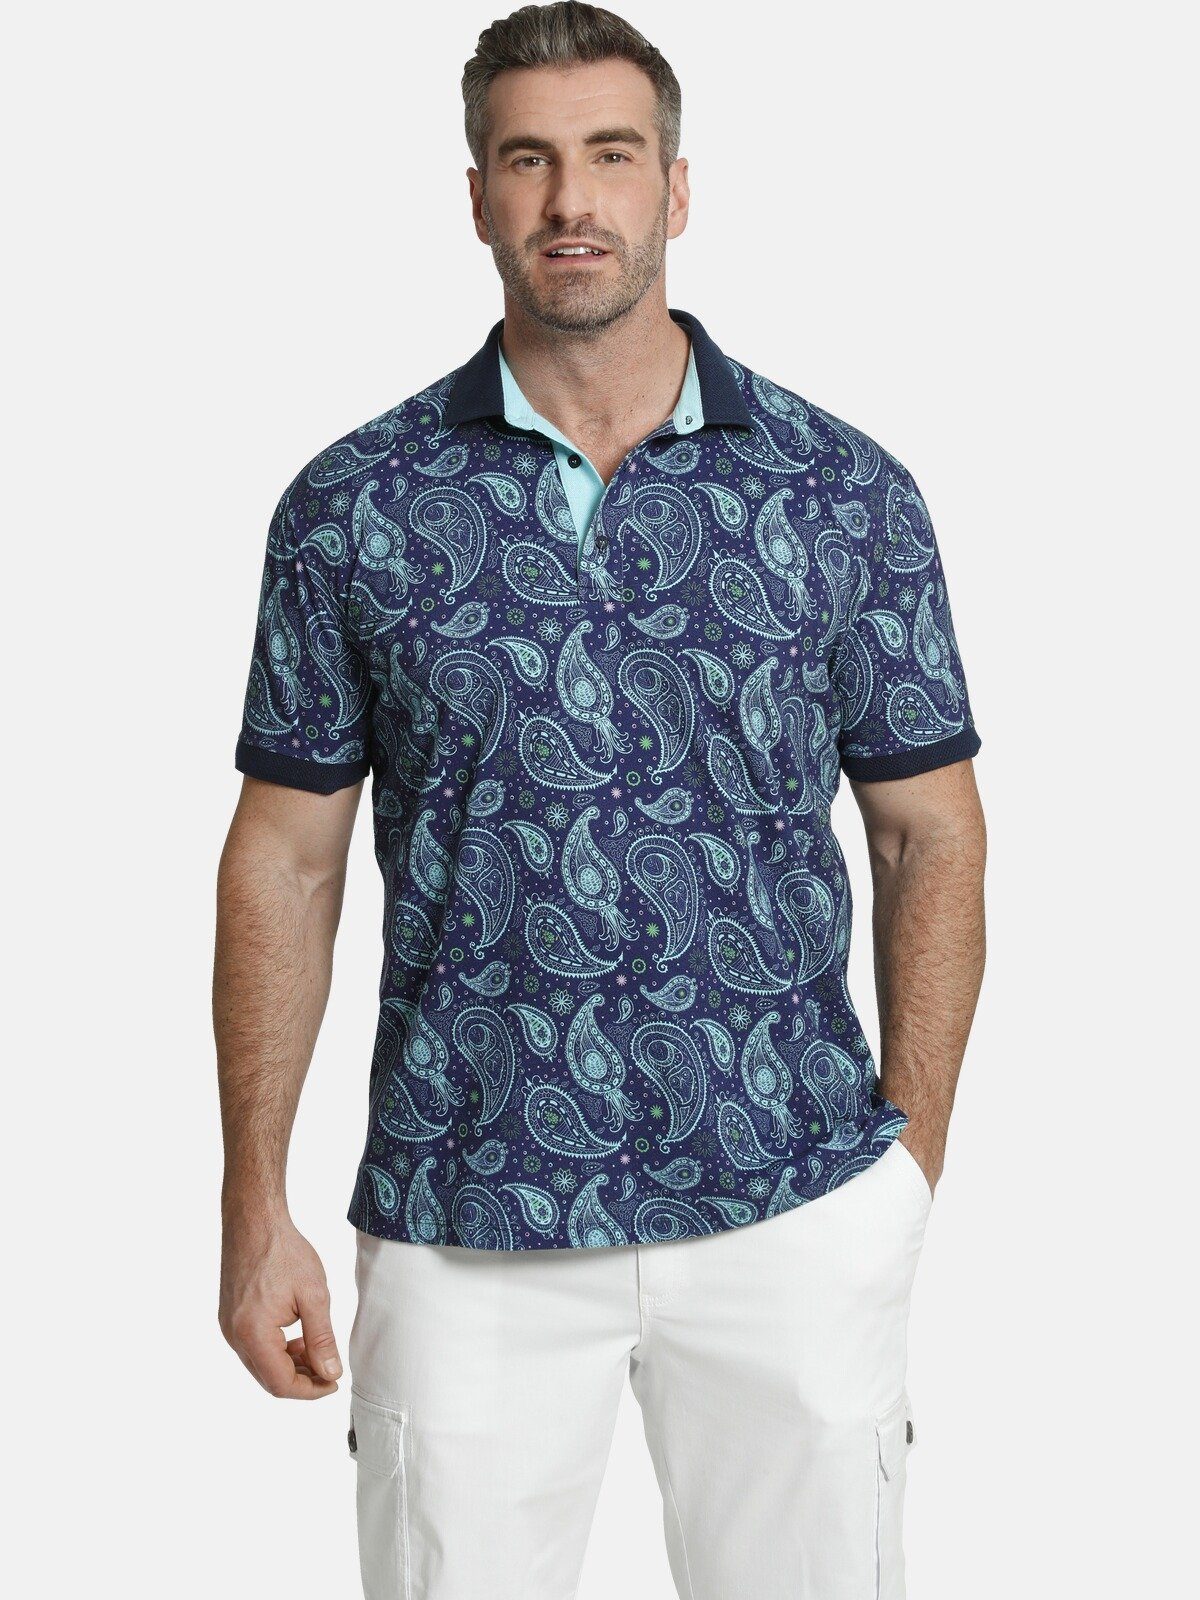 Charles Colby Poloshirt EARL SUITBERT Paisley Muster, Comfort Fit blau | Poloshirts